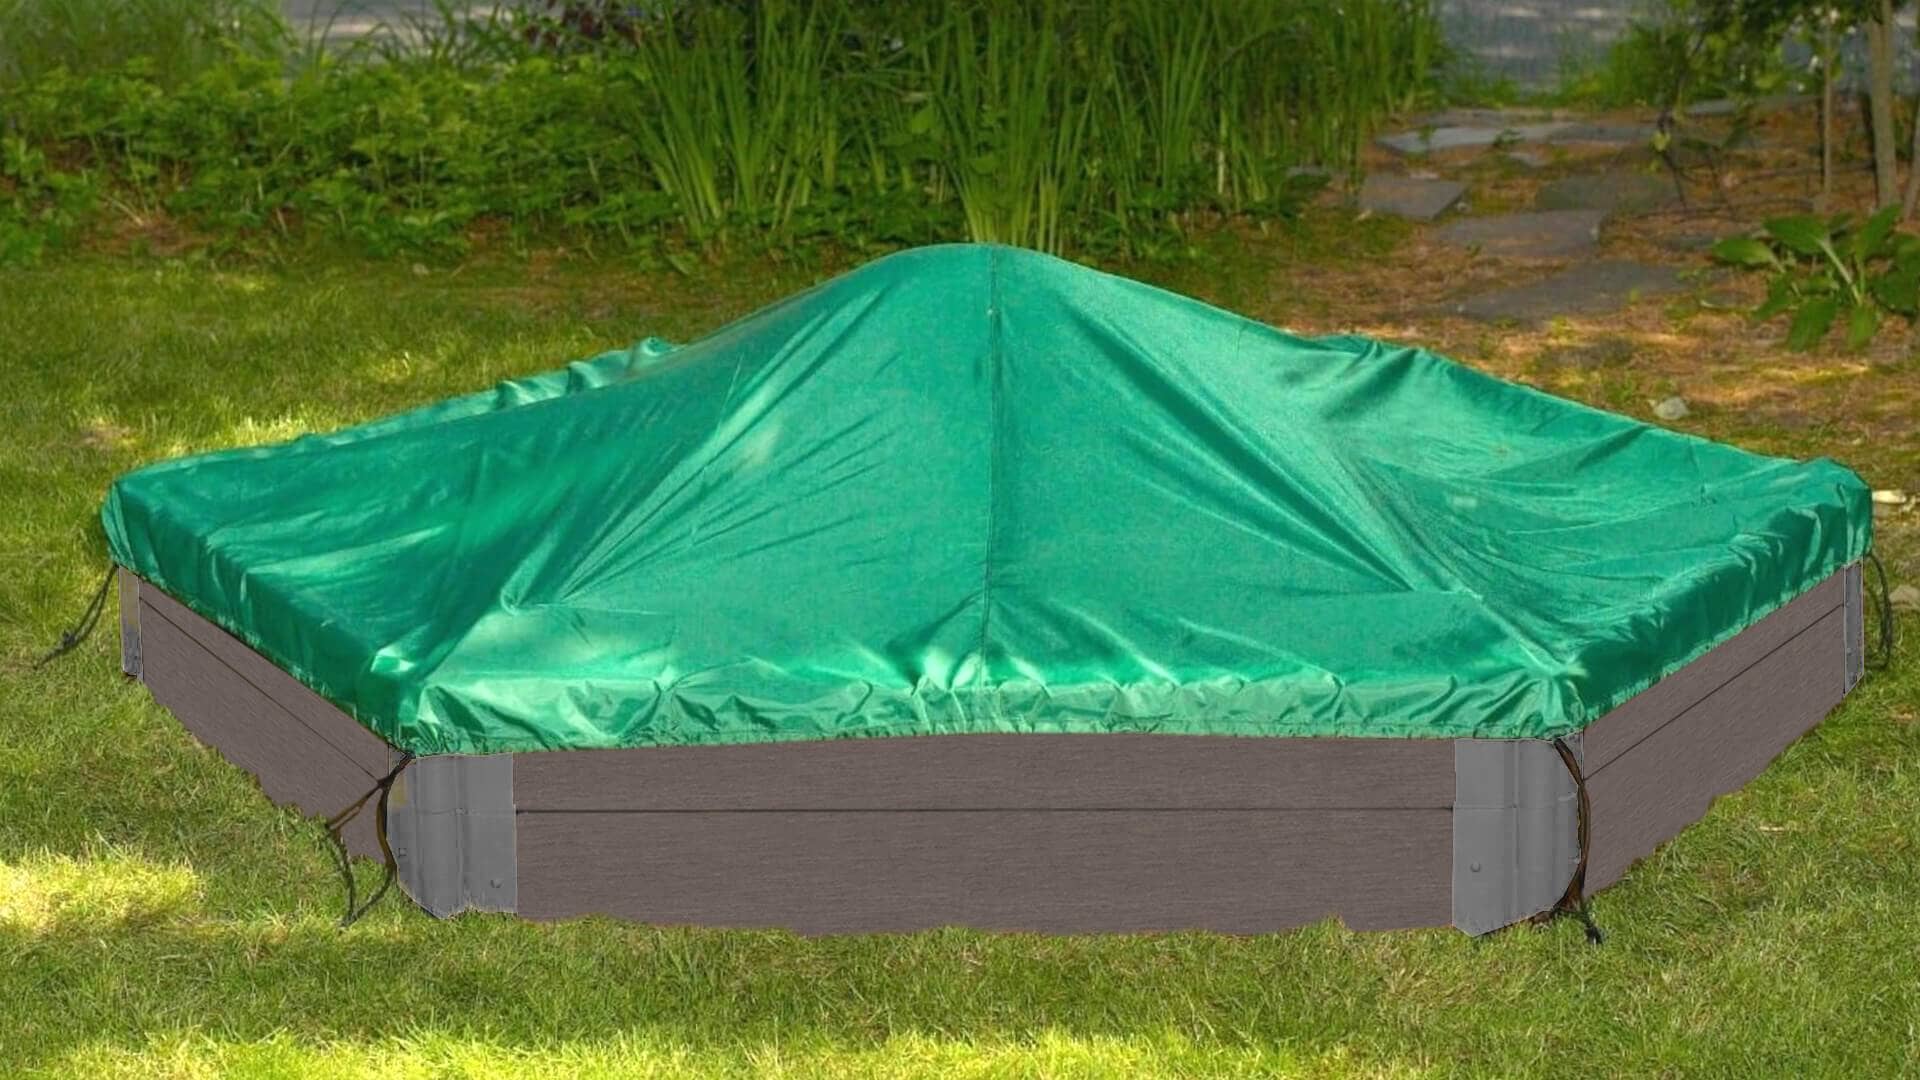 7' x 8' Composite Hexagon Sandbox - 2 Inch Profile Sandboxes Frame It All Weathered Wood 2 Inch 11" Tarp Cover